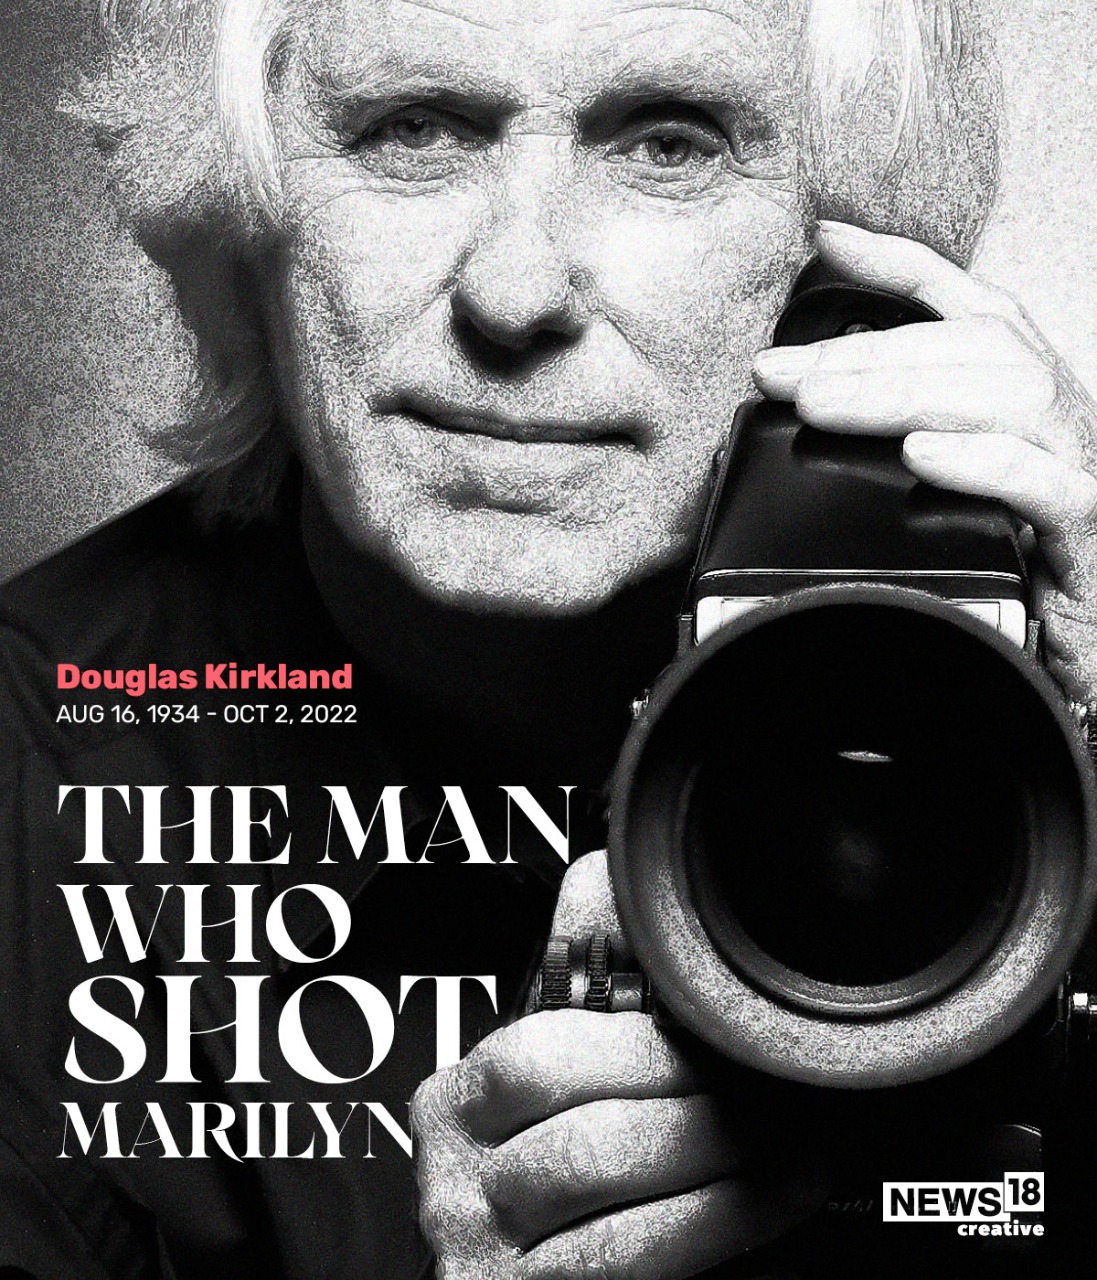 Douglas Kirkland Dead: A Look At Life and Times Of Photographer Who Shot  Marilyn Monroe And Many More - News18